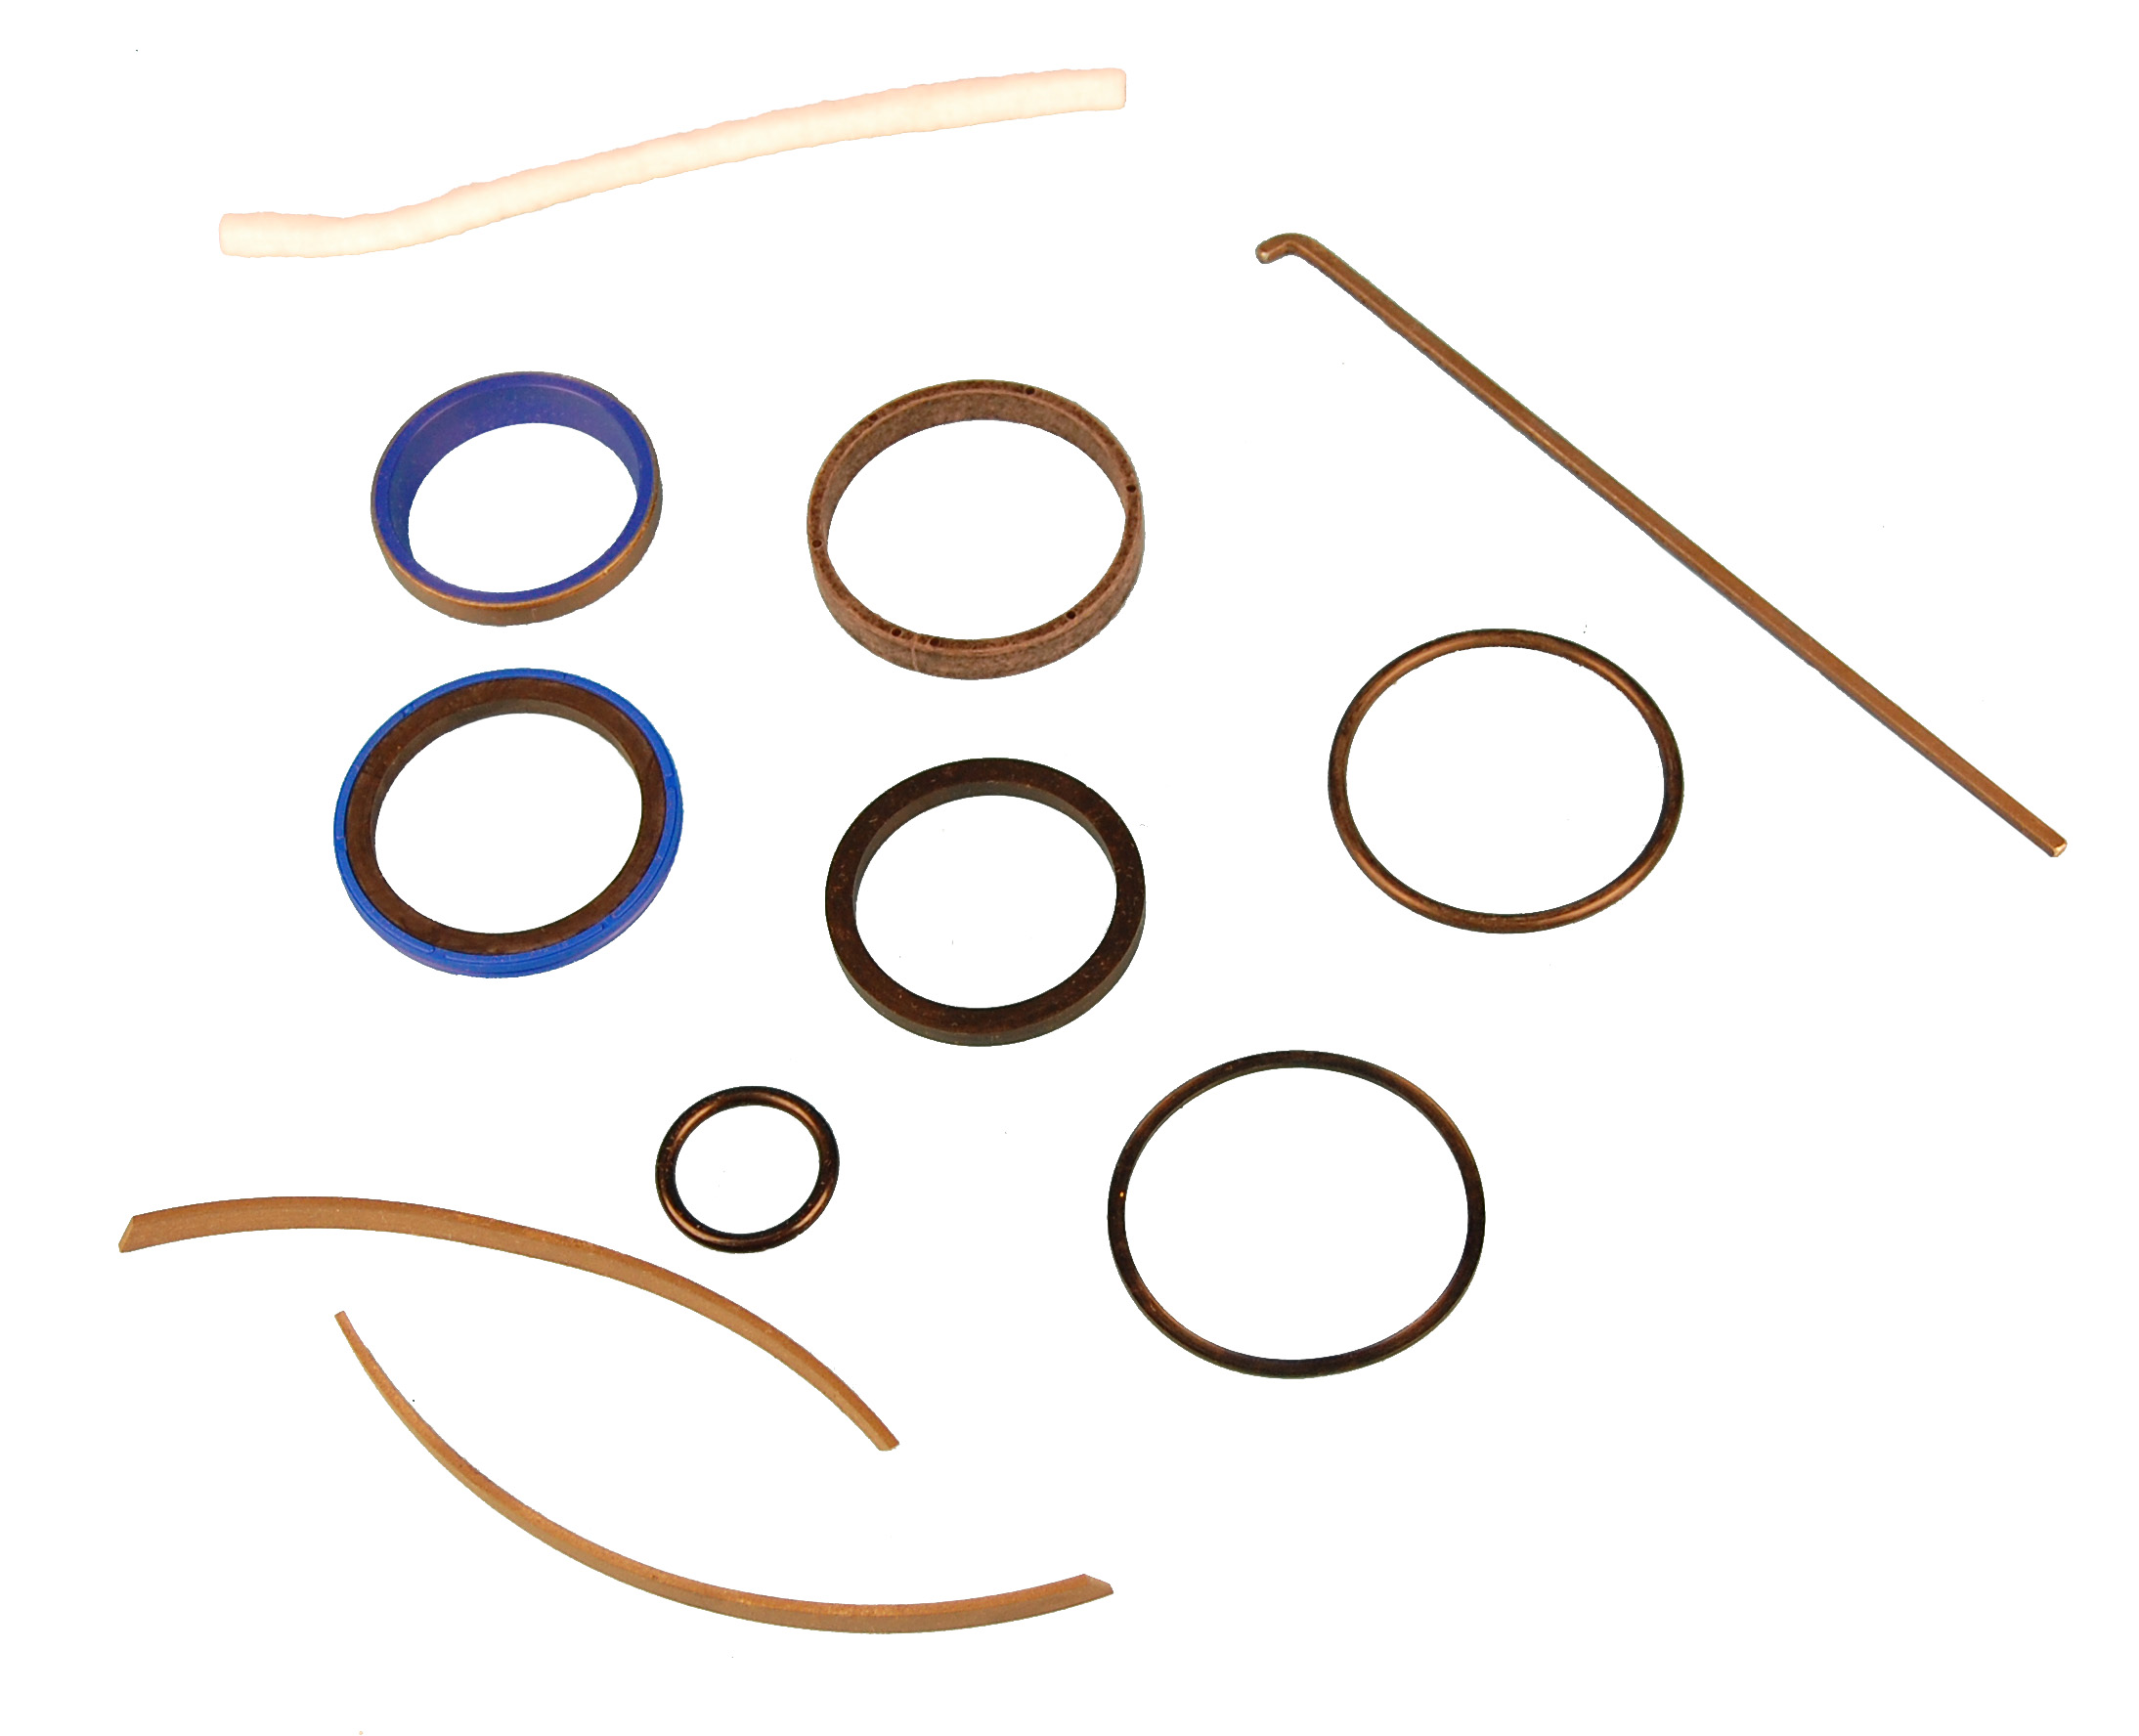 BH-7225-06 Cyl Seal Kit Mass Ferg Pacoma - Replaces Challenger 11062 and 200012